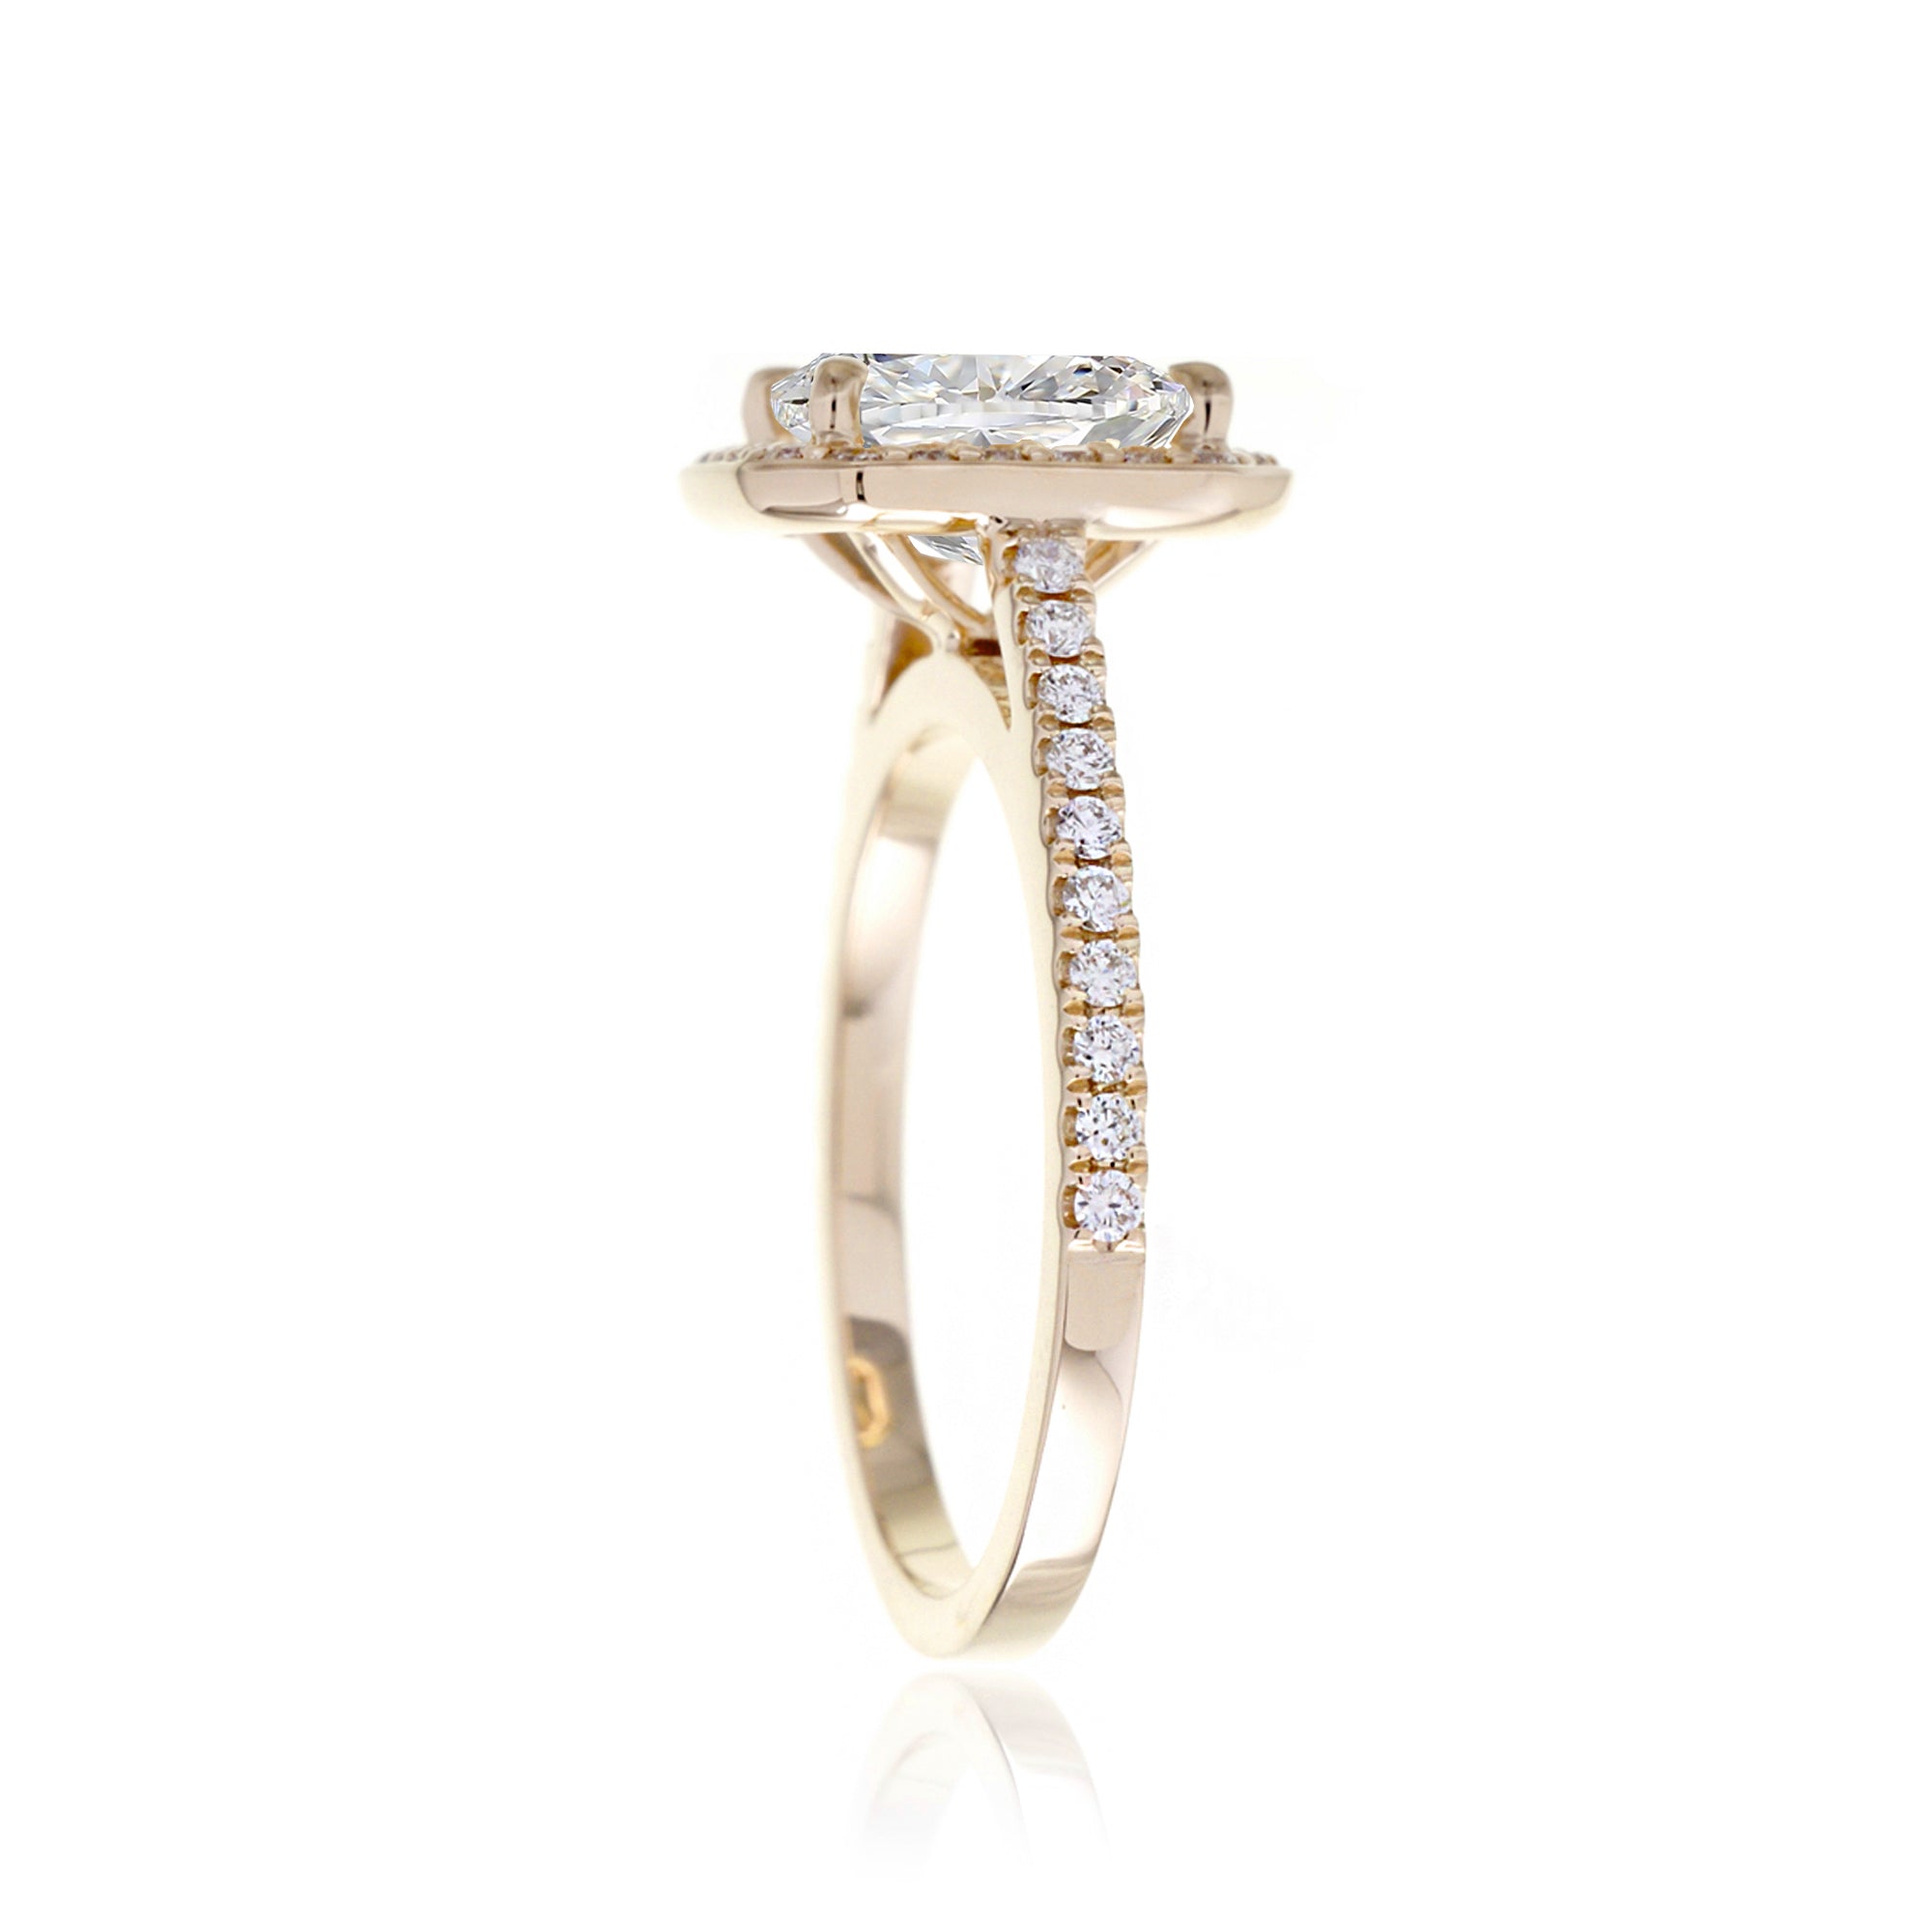 Cushion lab-grown diamond halo cathedral engagement ring - the Steffy yellow gold